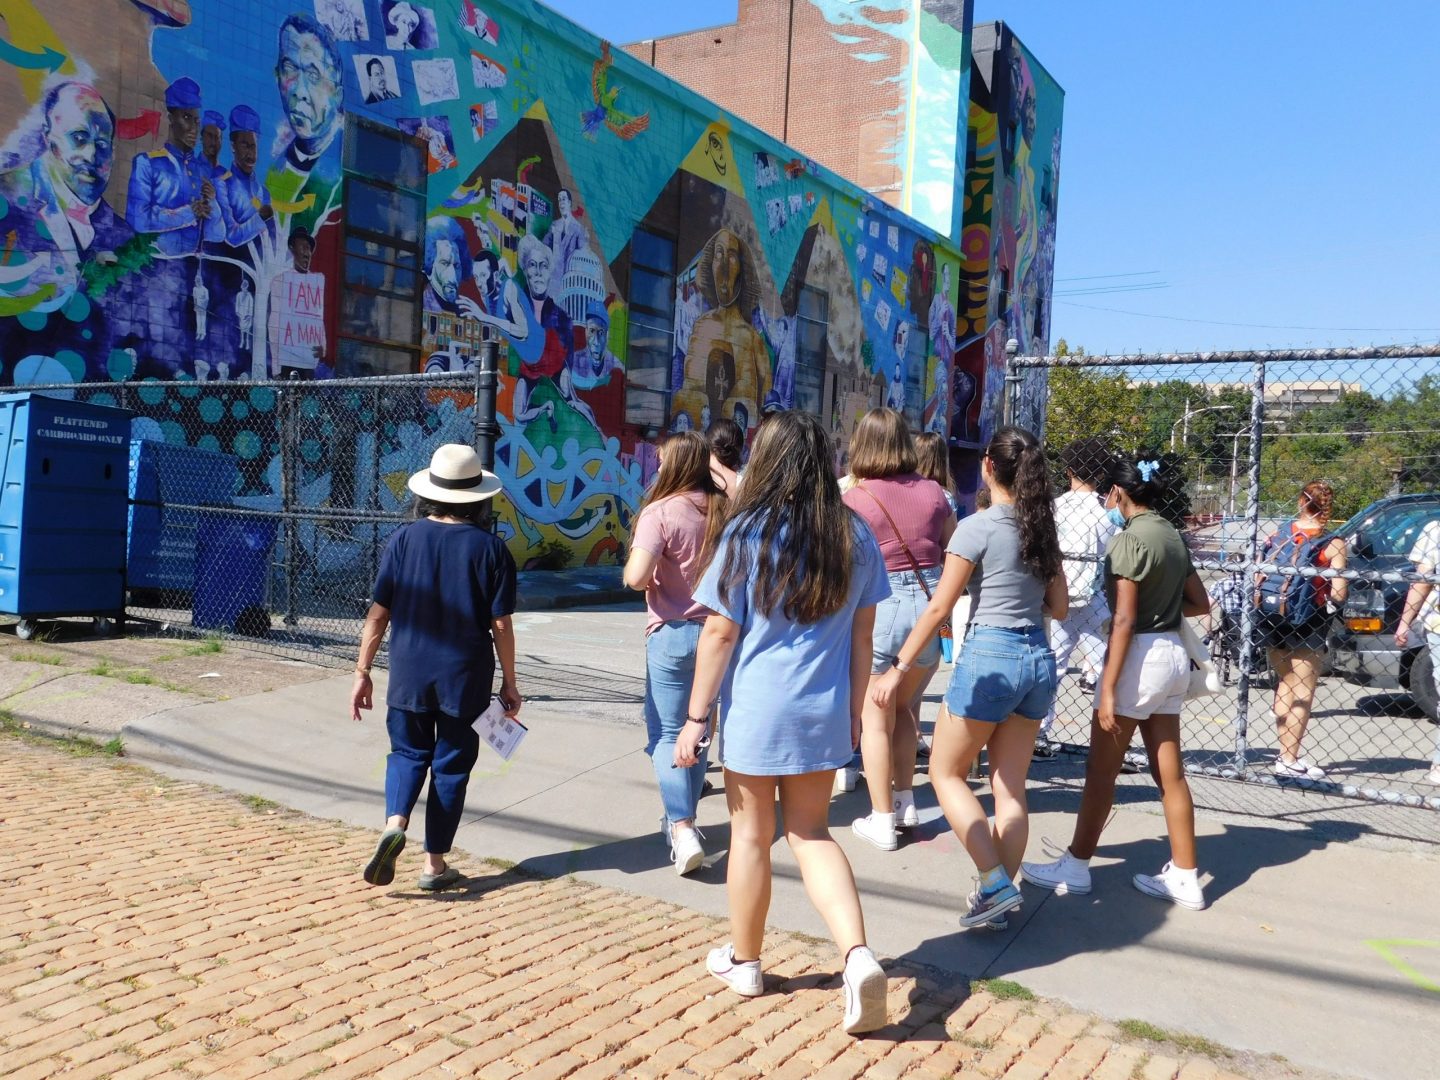 Image of a group of people walking into the current parking lot (future site of the CEA plaza). The people are walking towards the colorful mural that takes up the entire side of the CEA building.